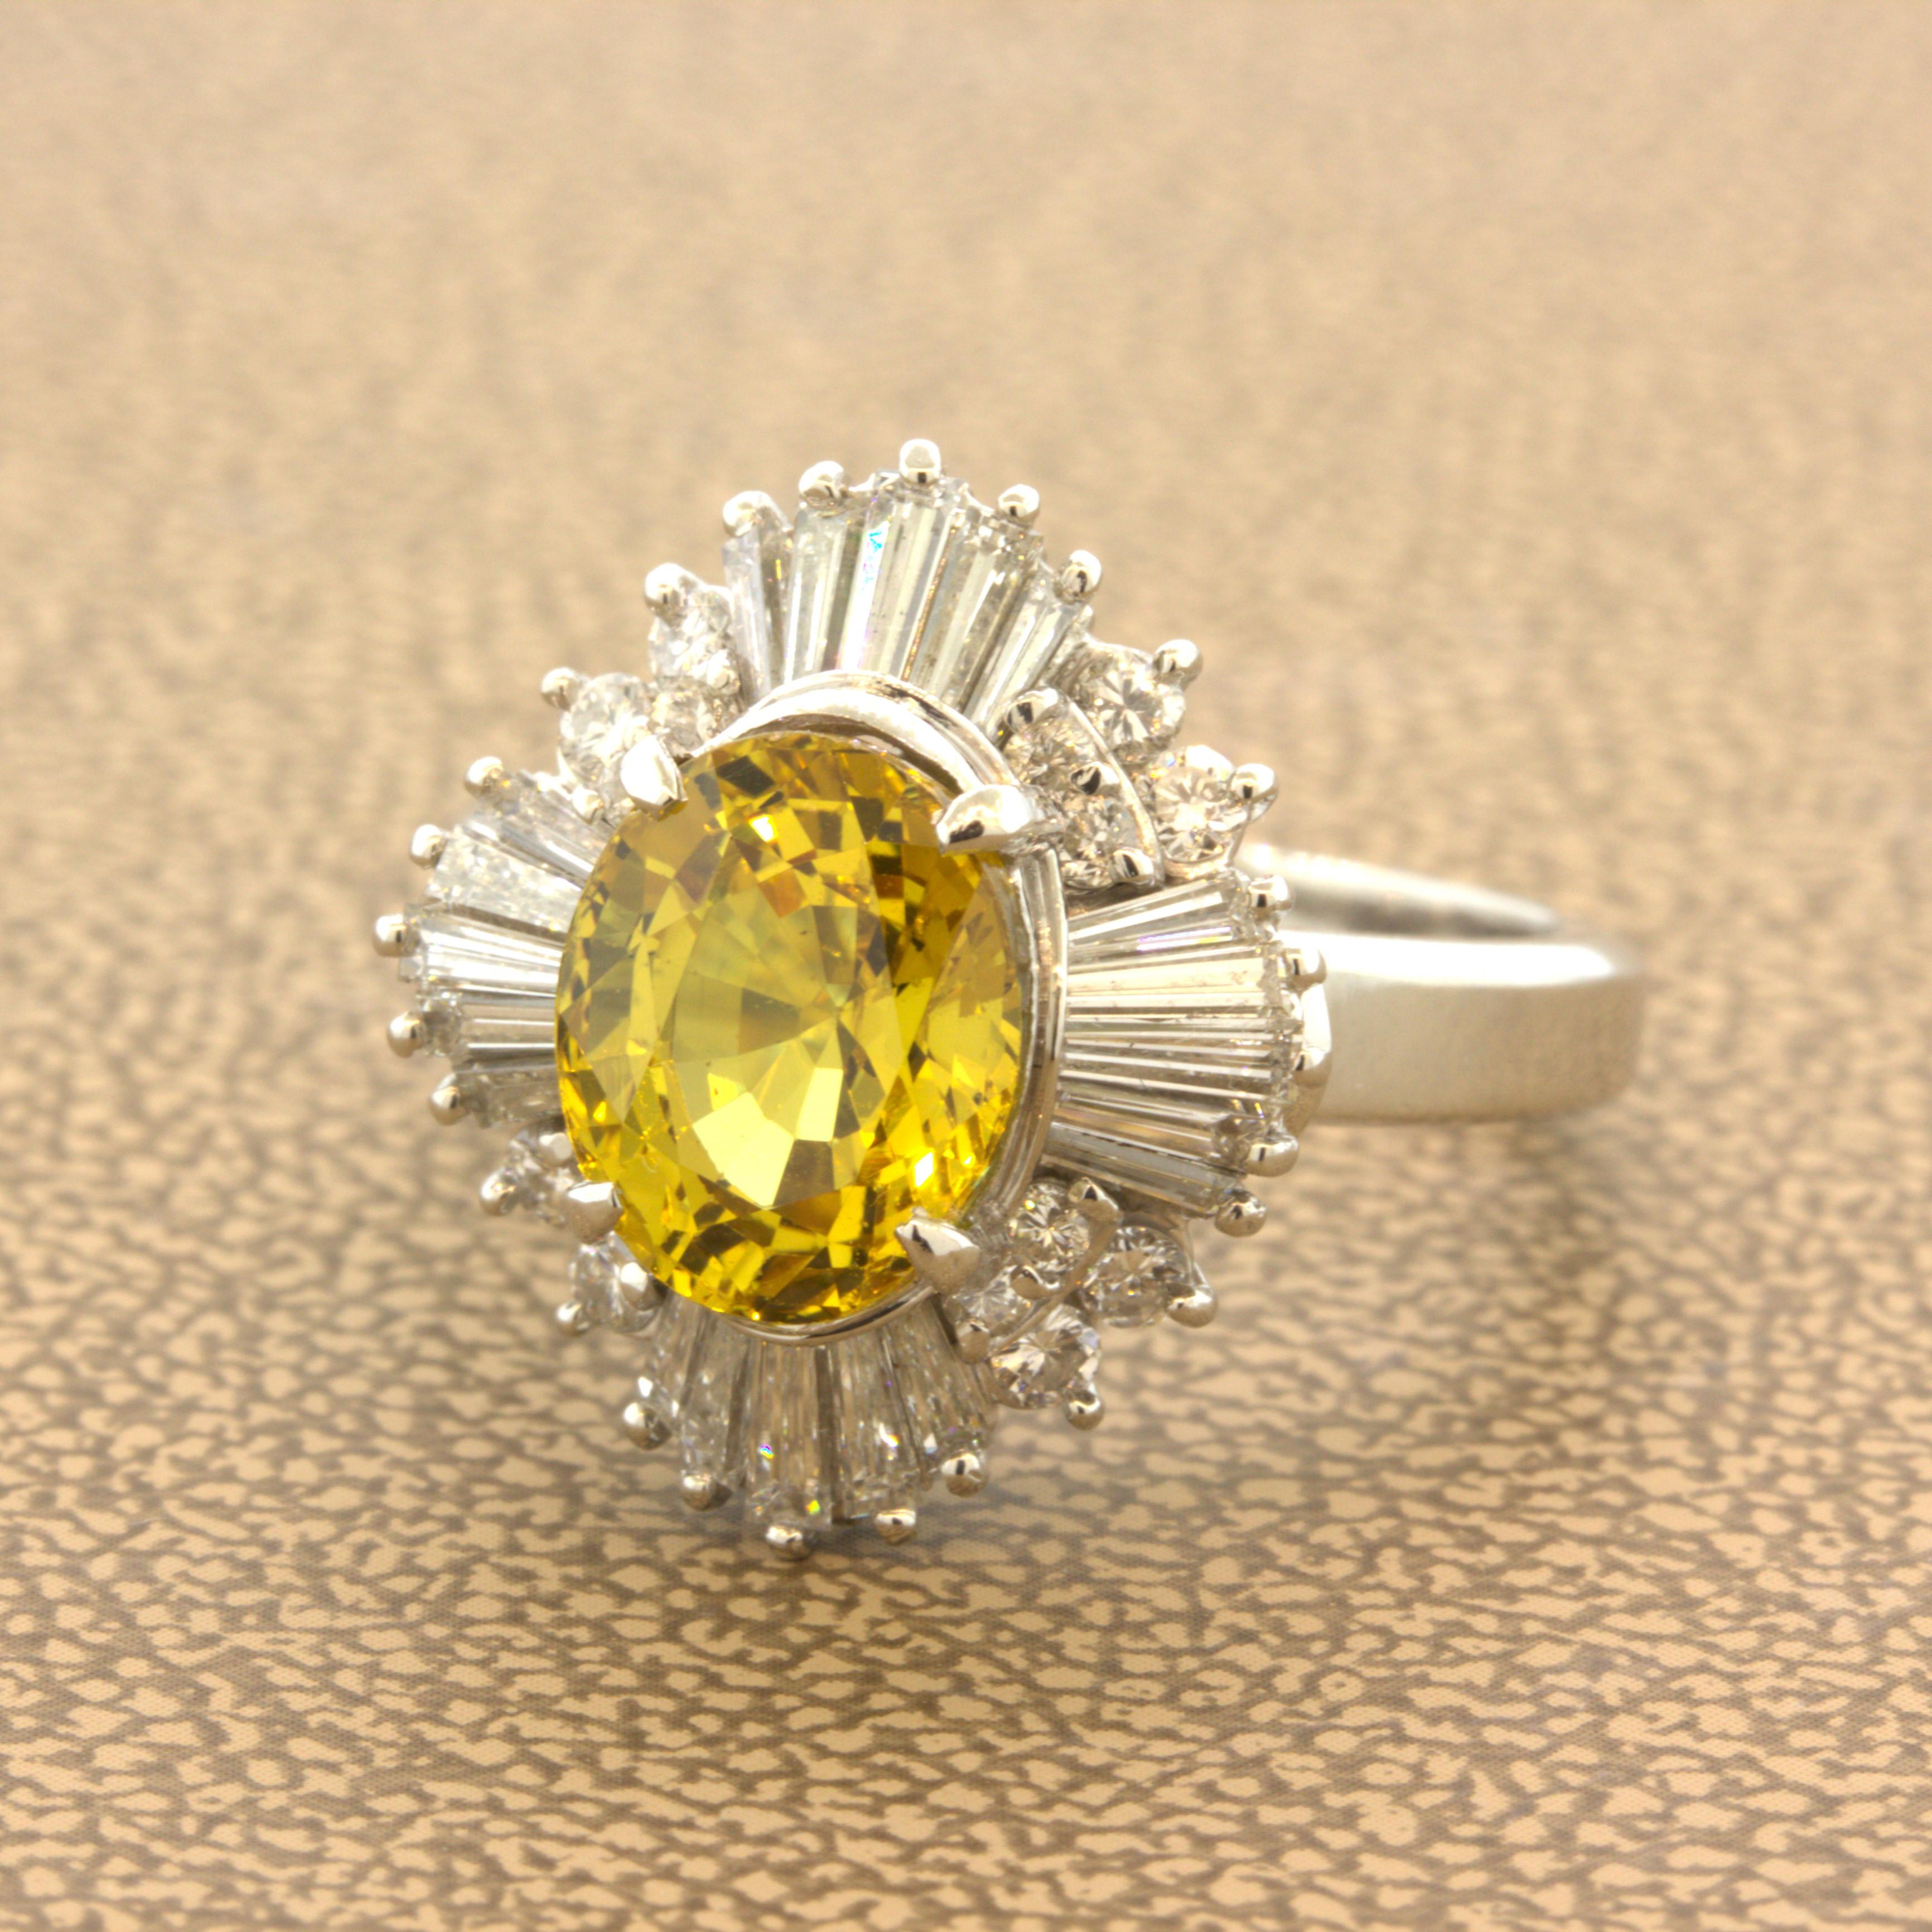 3.77 Carat Yellow-Sapphire Diamond Sunburst Platinum Ring

A lovely gemstone ring featuring a 3.77 carats yellow sapphire. It has a bright and rich vivid yellow color that glows in the light. The stone is completely clean allowing for the bright